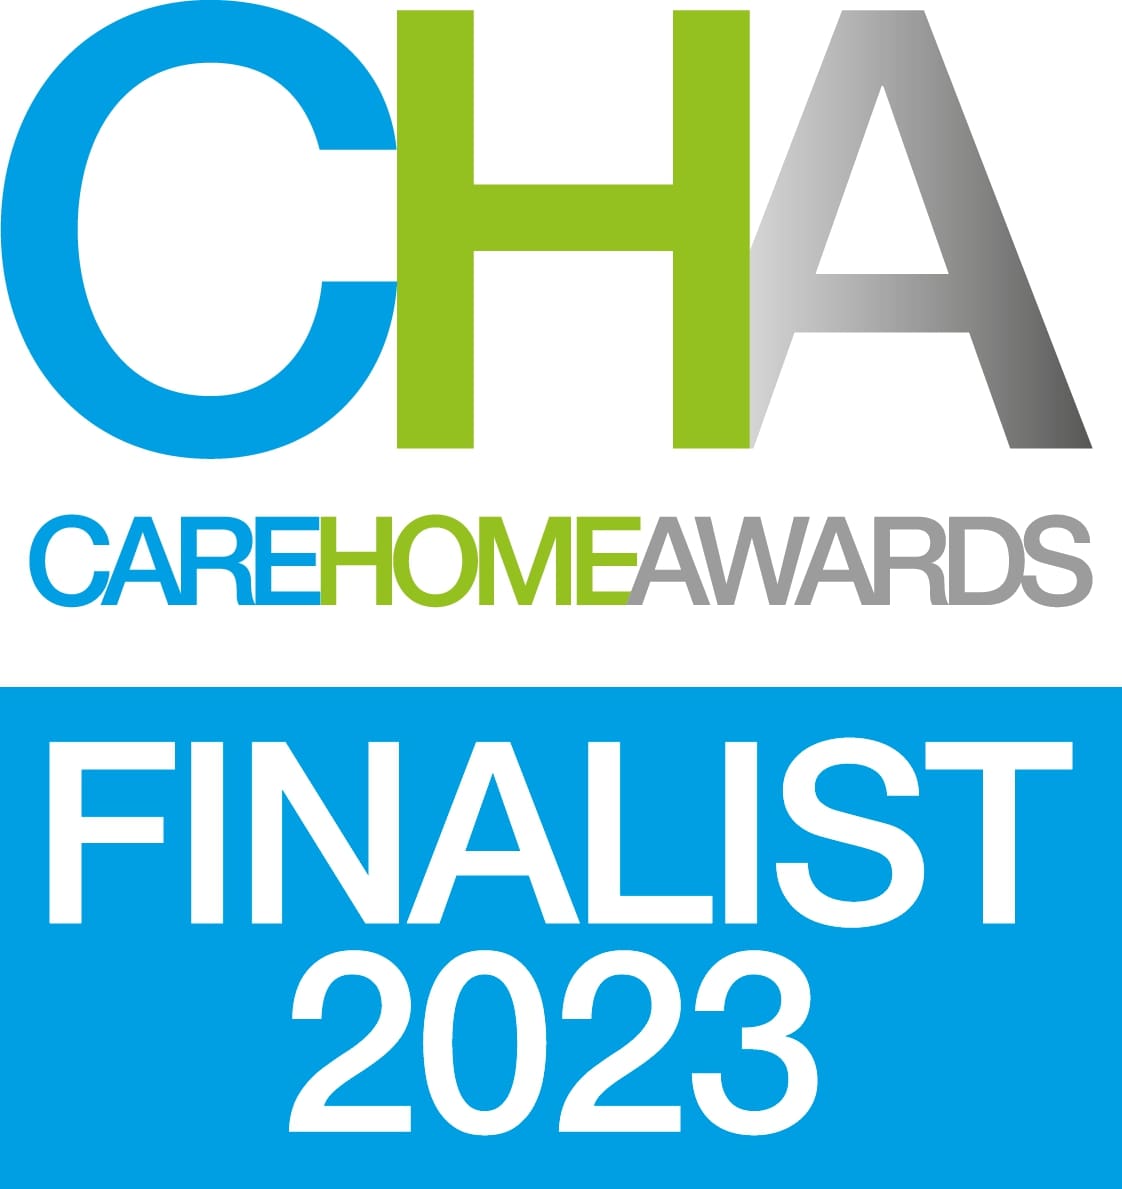 Care Home Awards 2023 Finalist - Best for Training and Development 